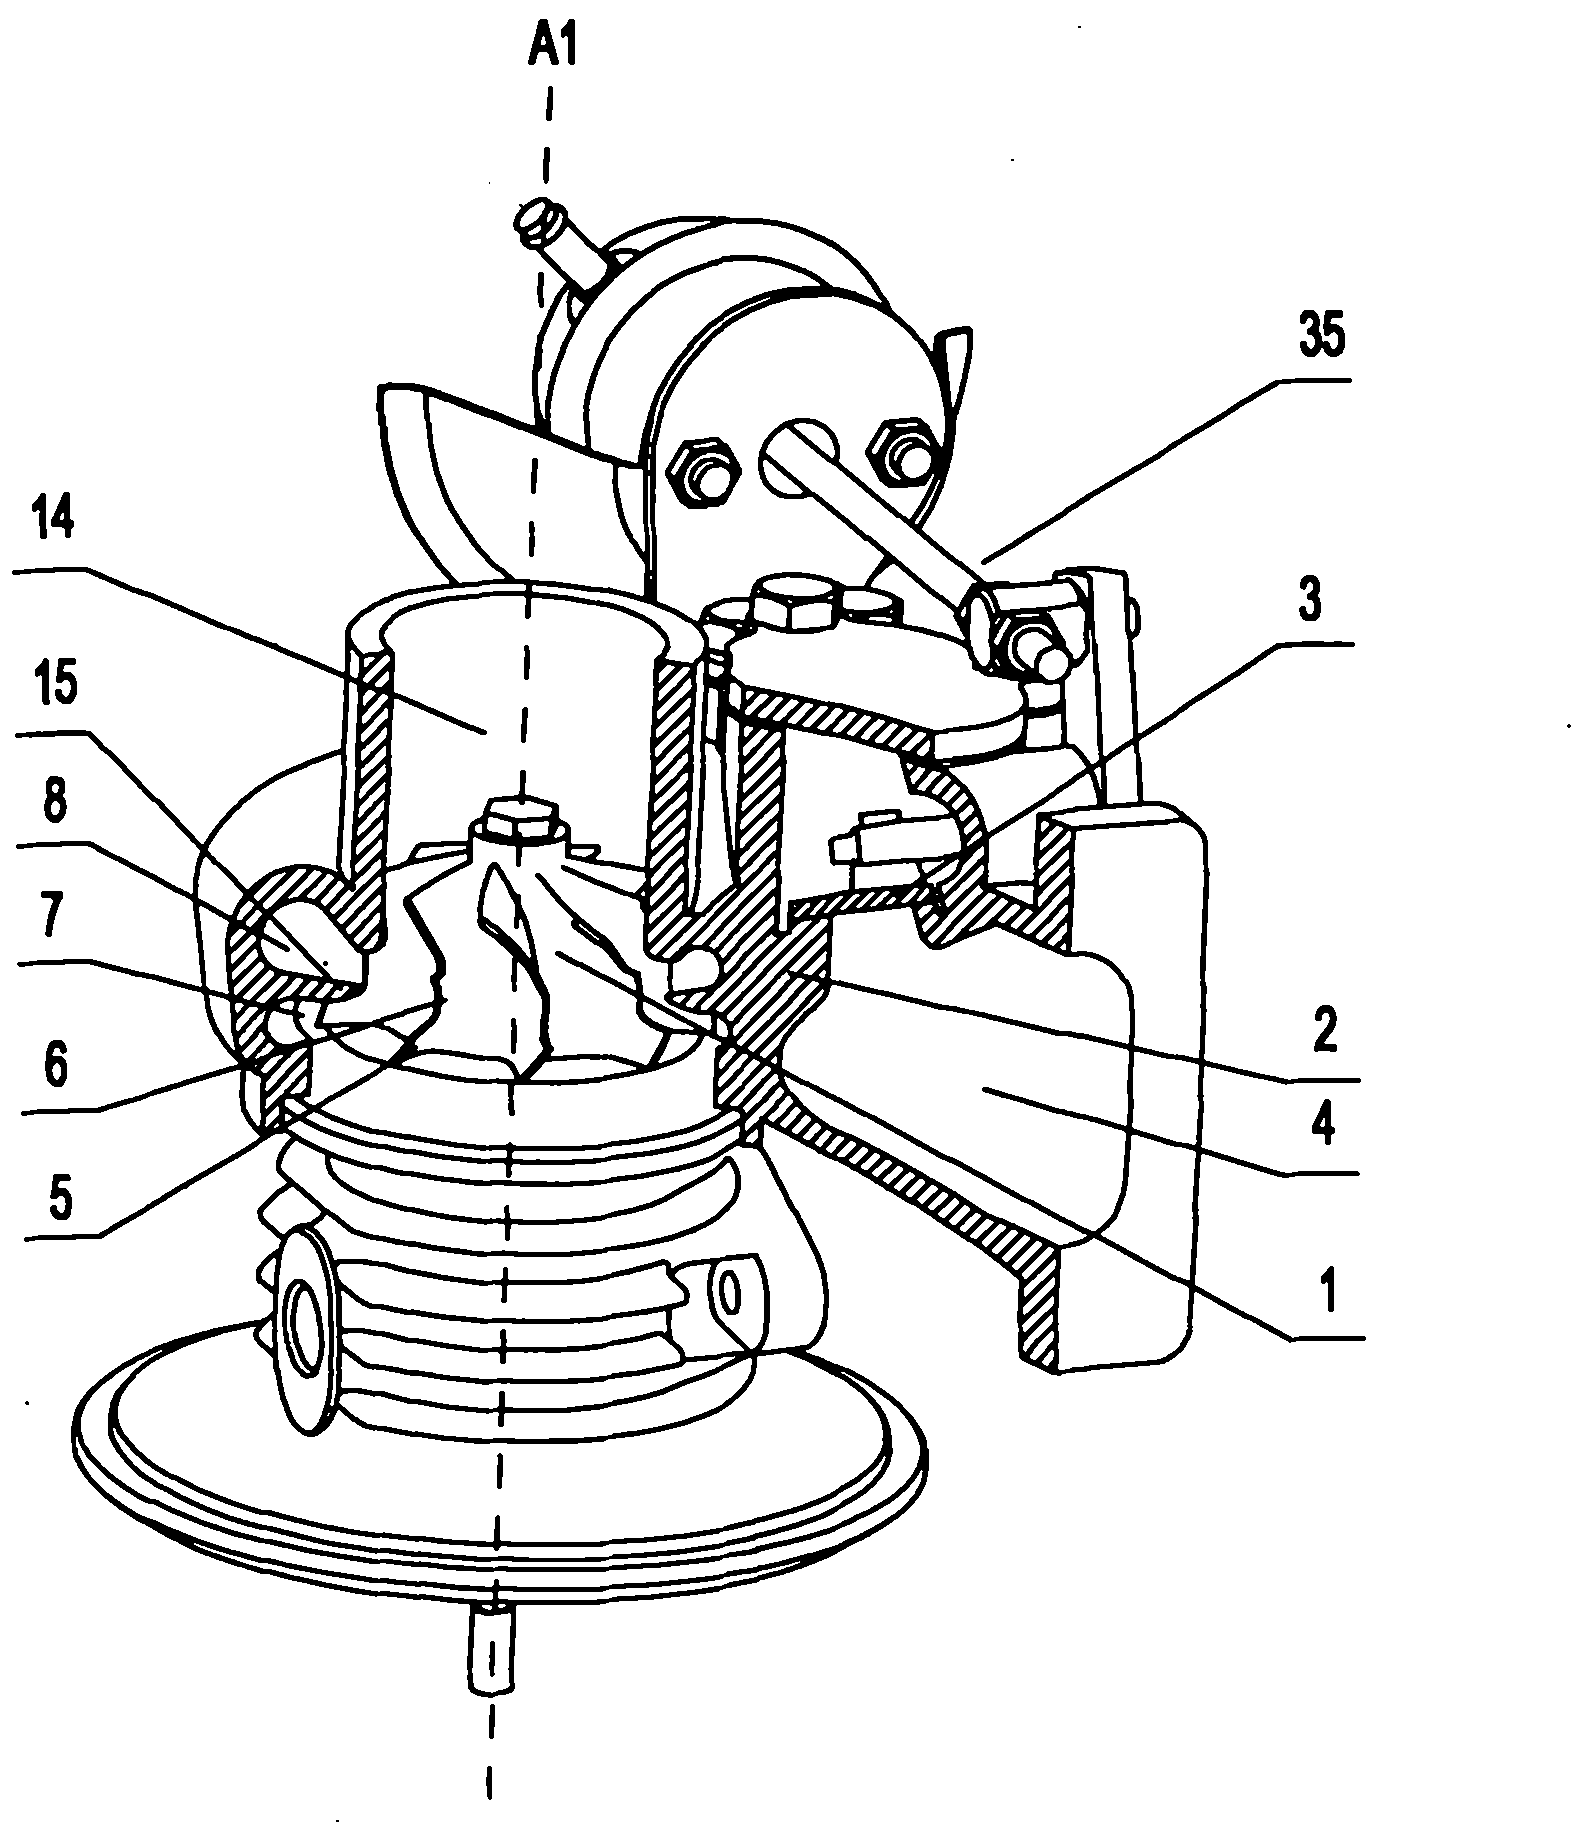 Complex turbine device with variable section